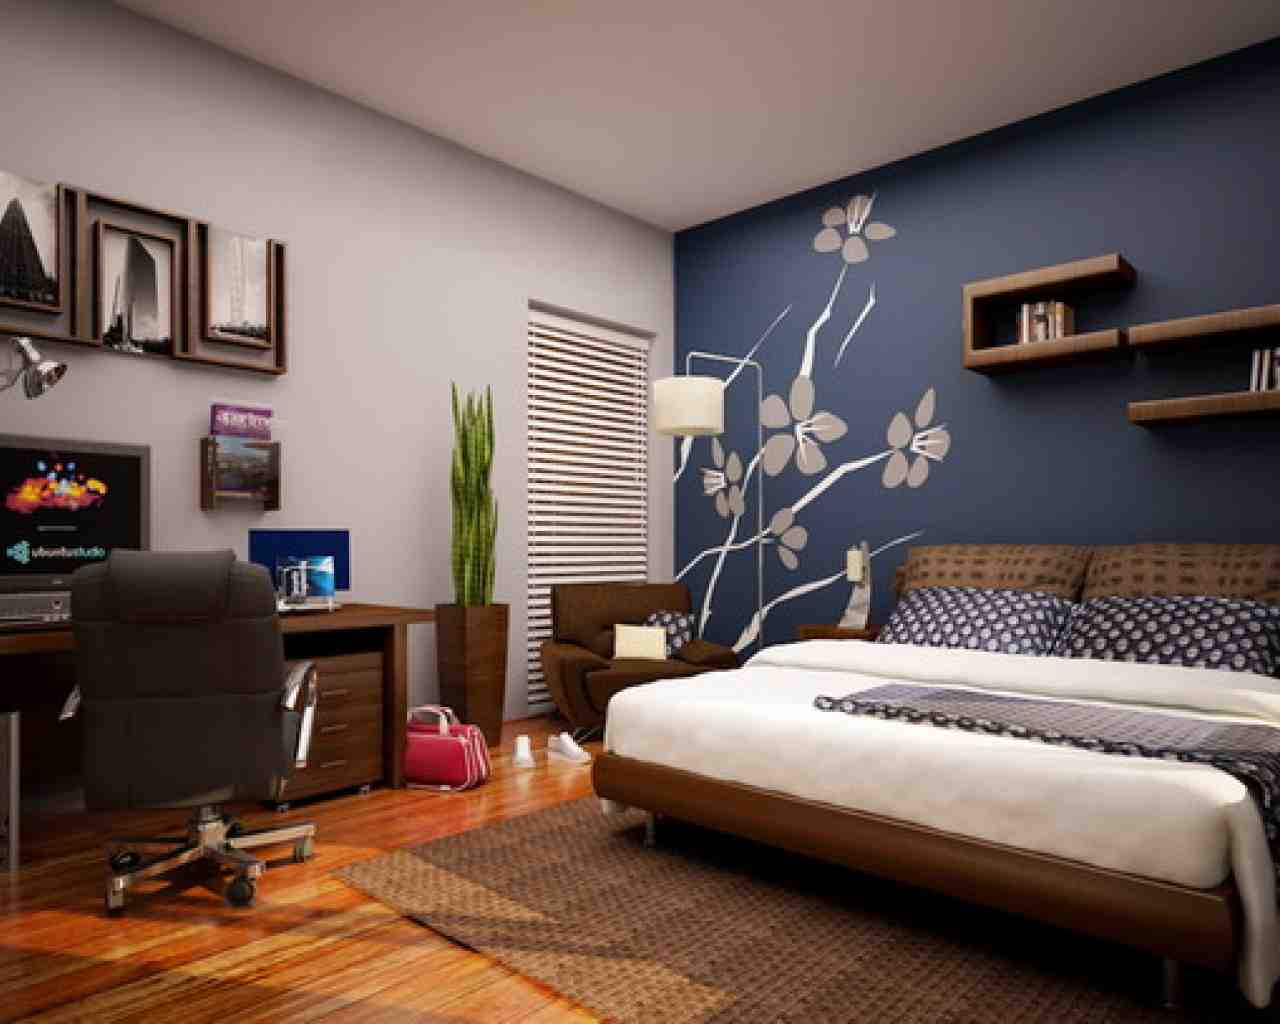 Decorating Bedroom Walls With Pictures